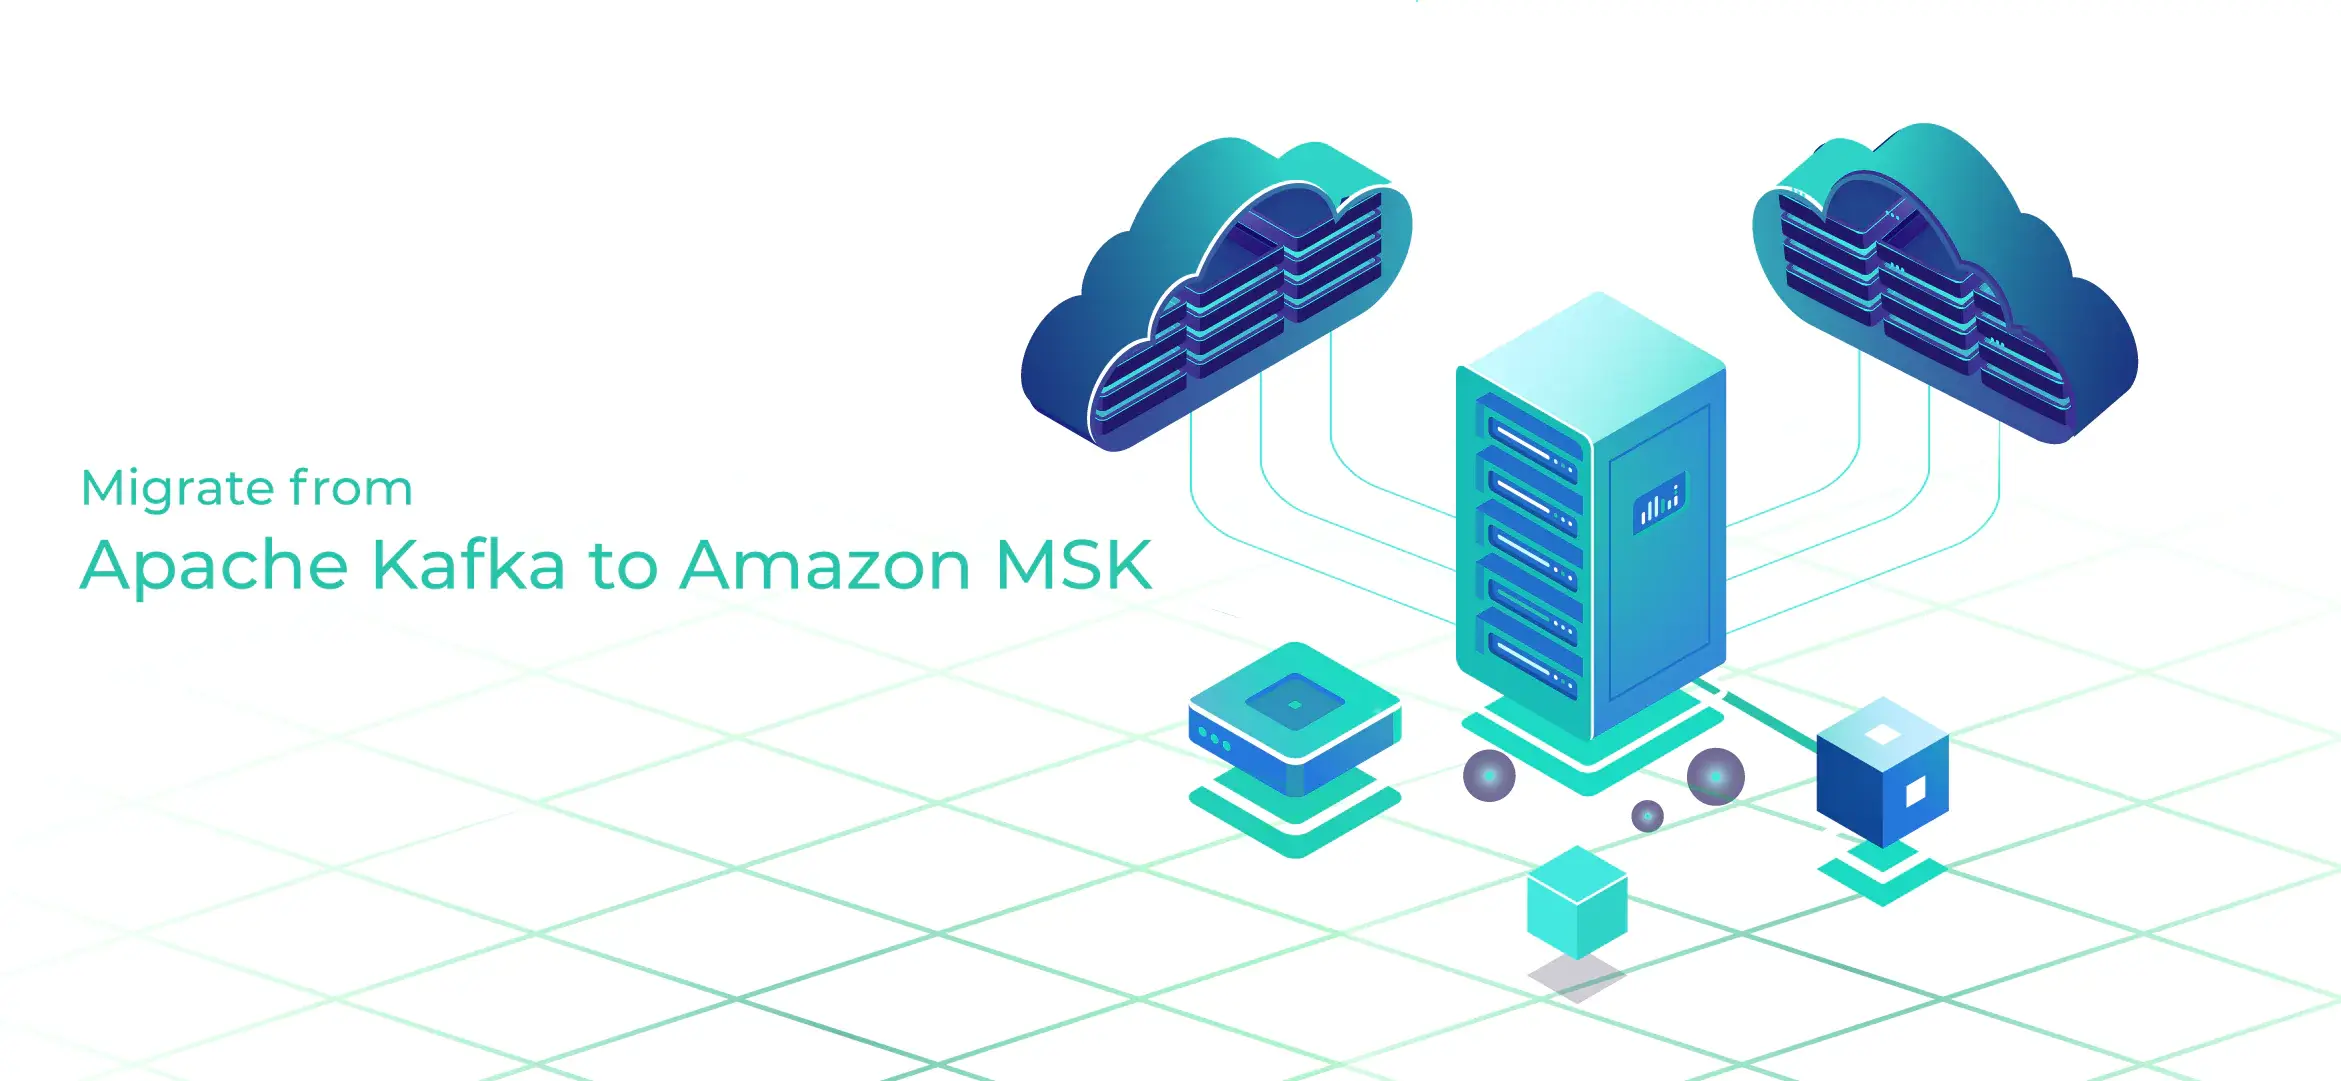 Migrate from Apache Kafka to Amazon MSK